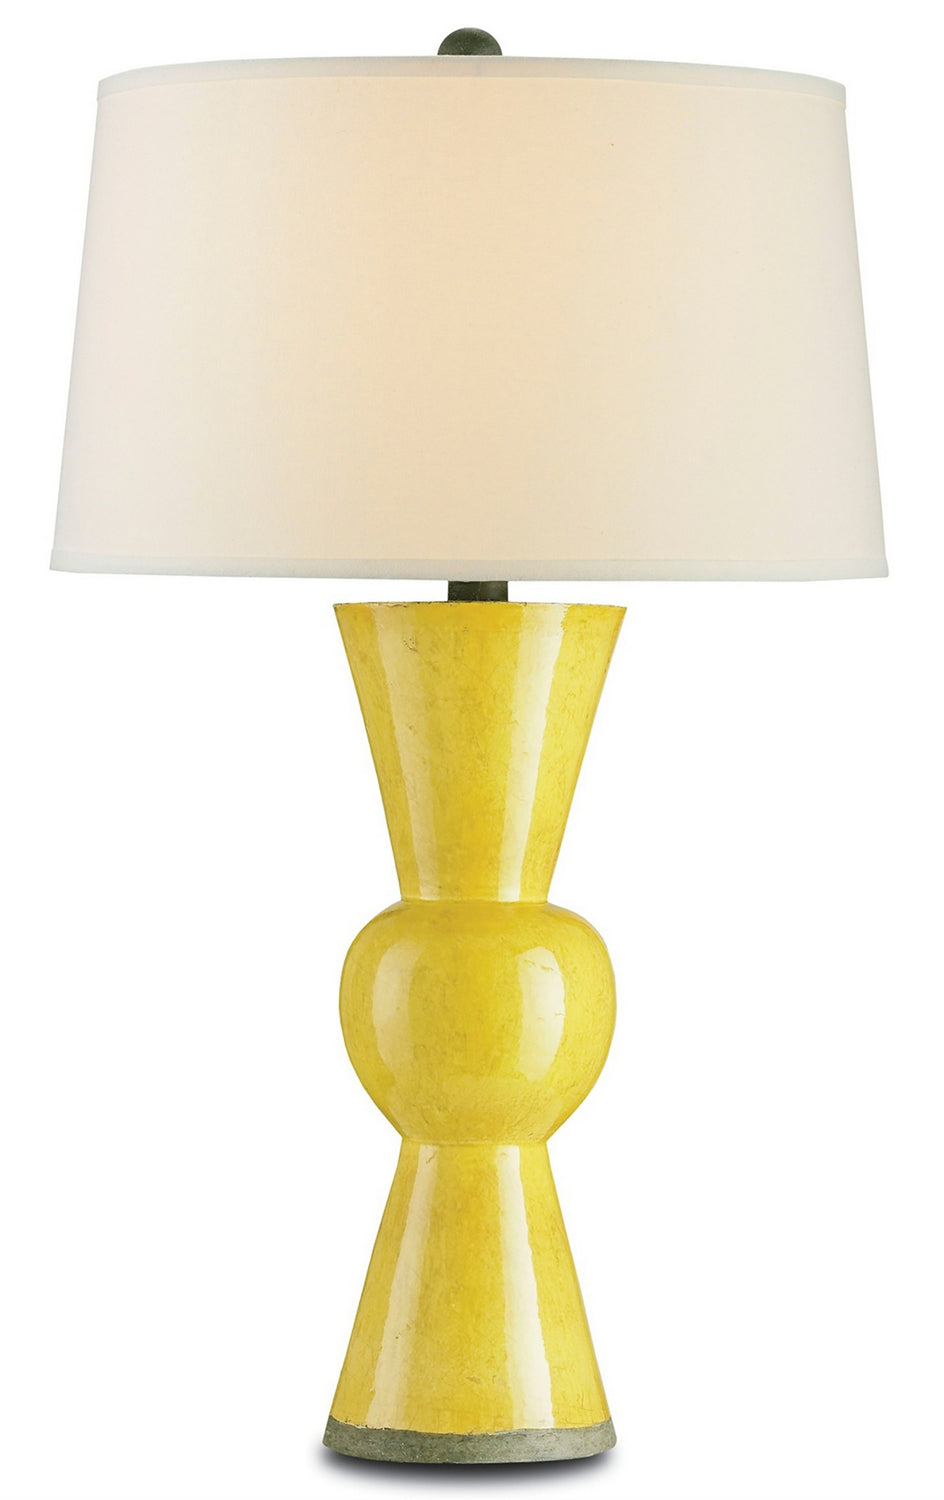 Currey and Company - 6382 - One Light Table Lamp - Upbeat - Yellow